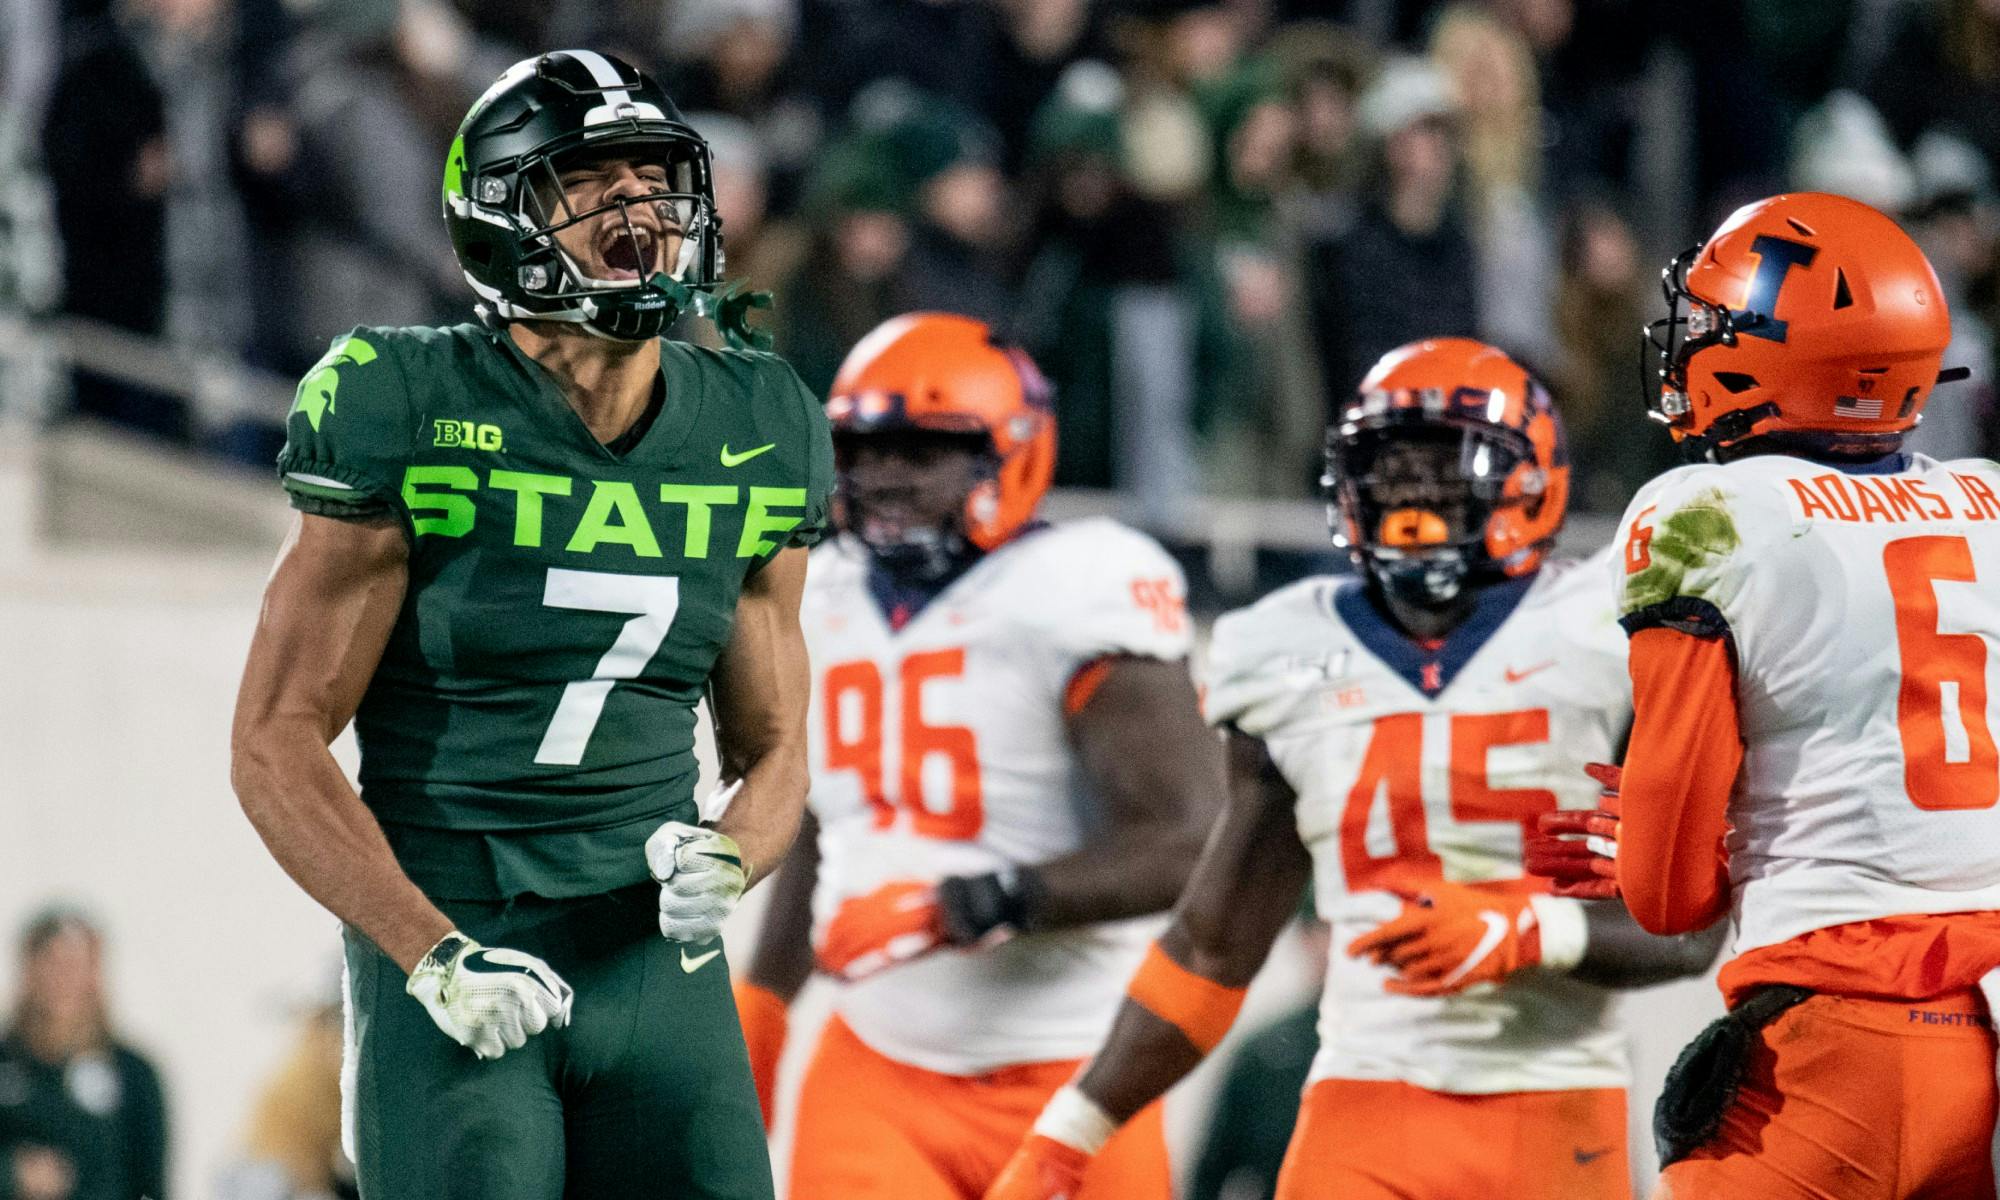 <p>Junior wide receiver Cody White (7) celebrates a catch during the game against Illinois on Nov. 9, 2019, at Spartan Stadium. The Spartans fell to the Fighting Illini, 37-34.</p>